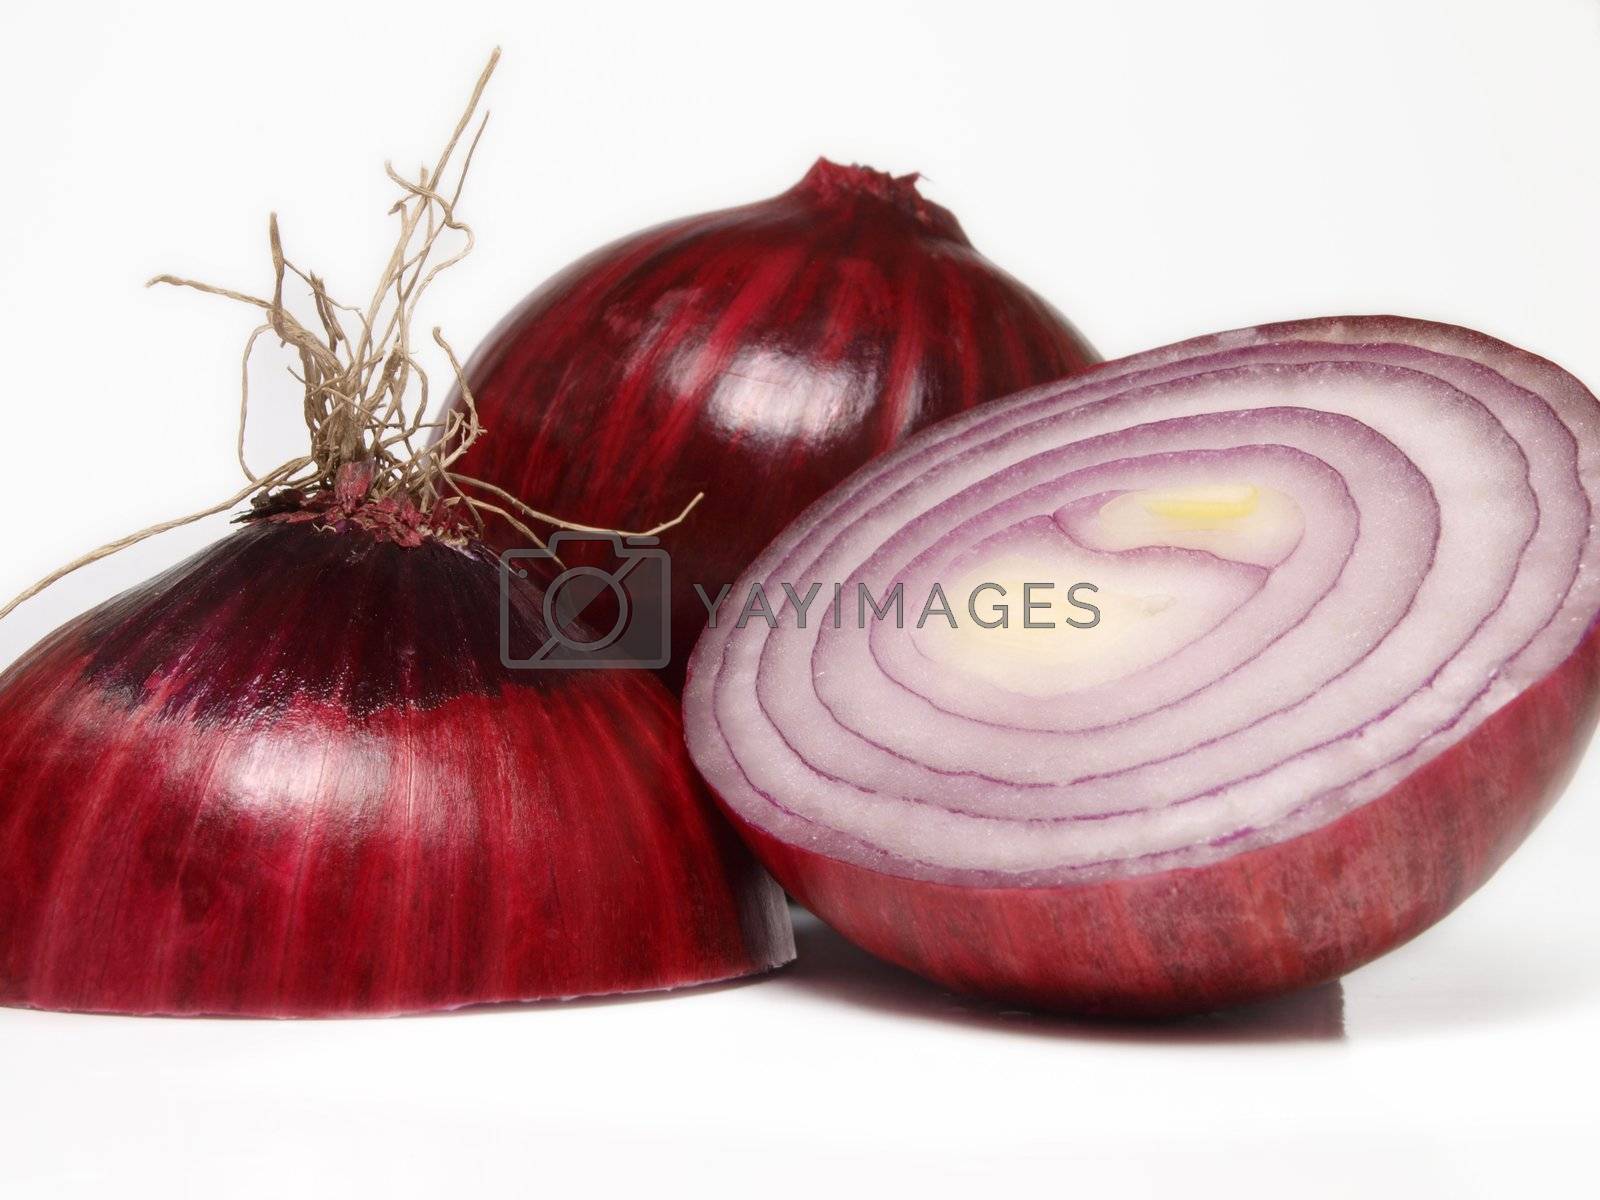 Royalty free image of Red onion by Arvebettum